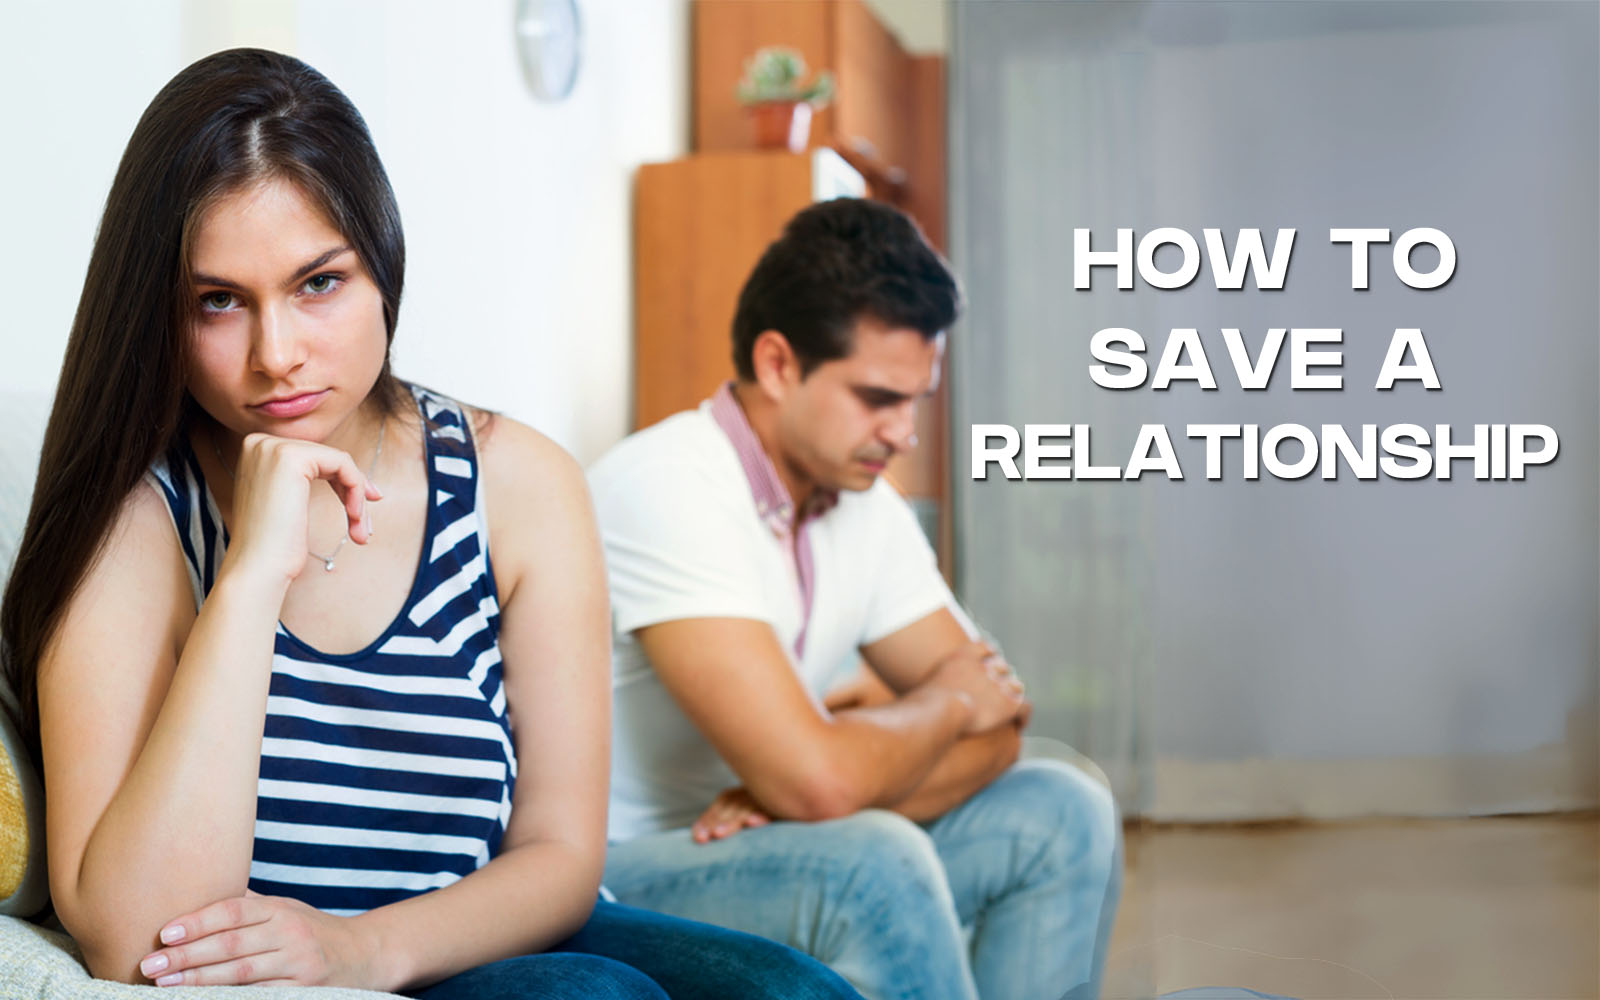 How to Save a Relationship